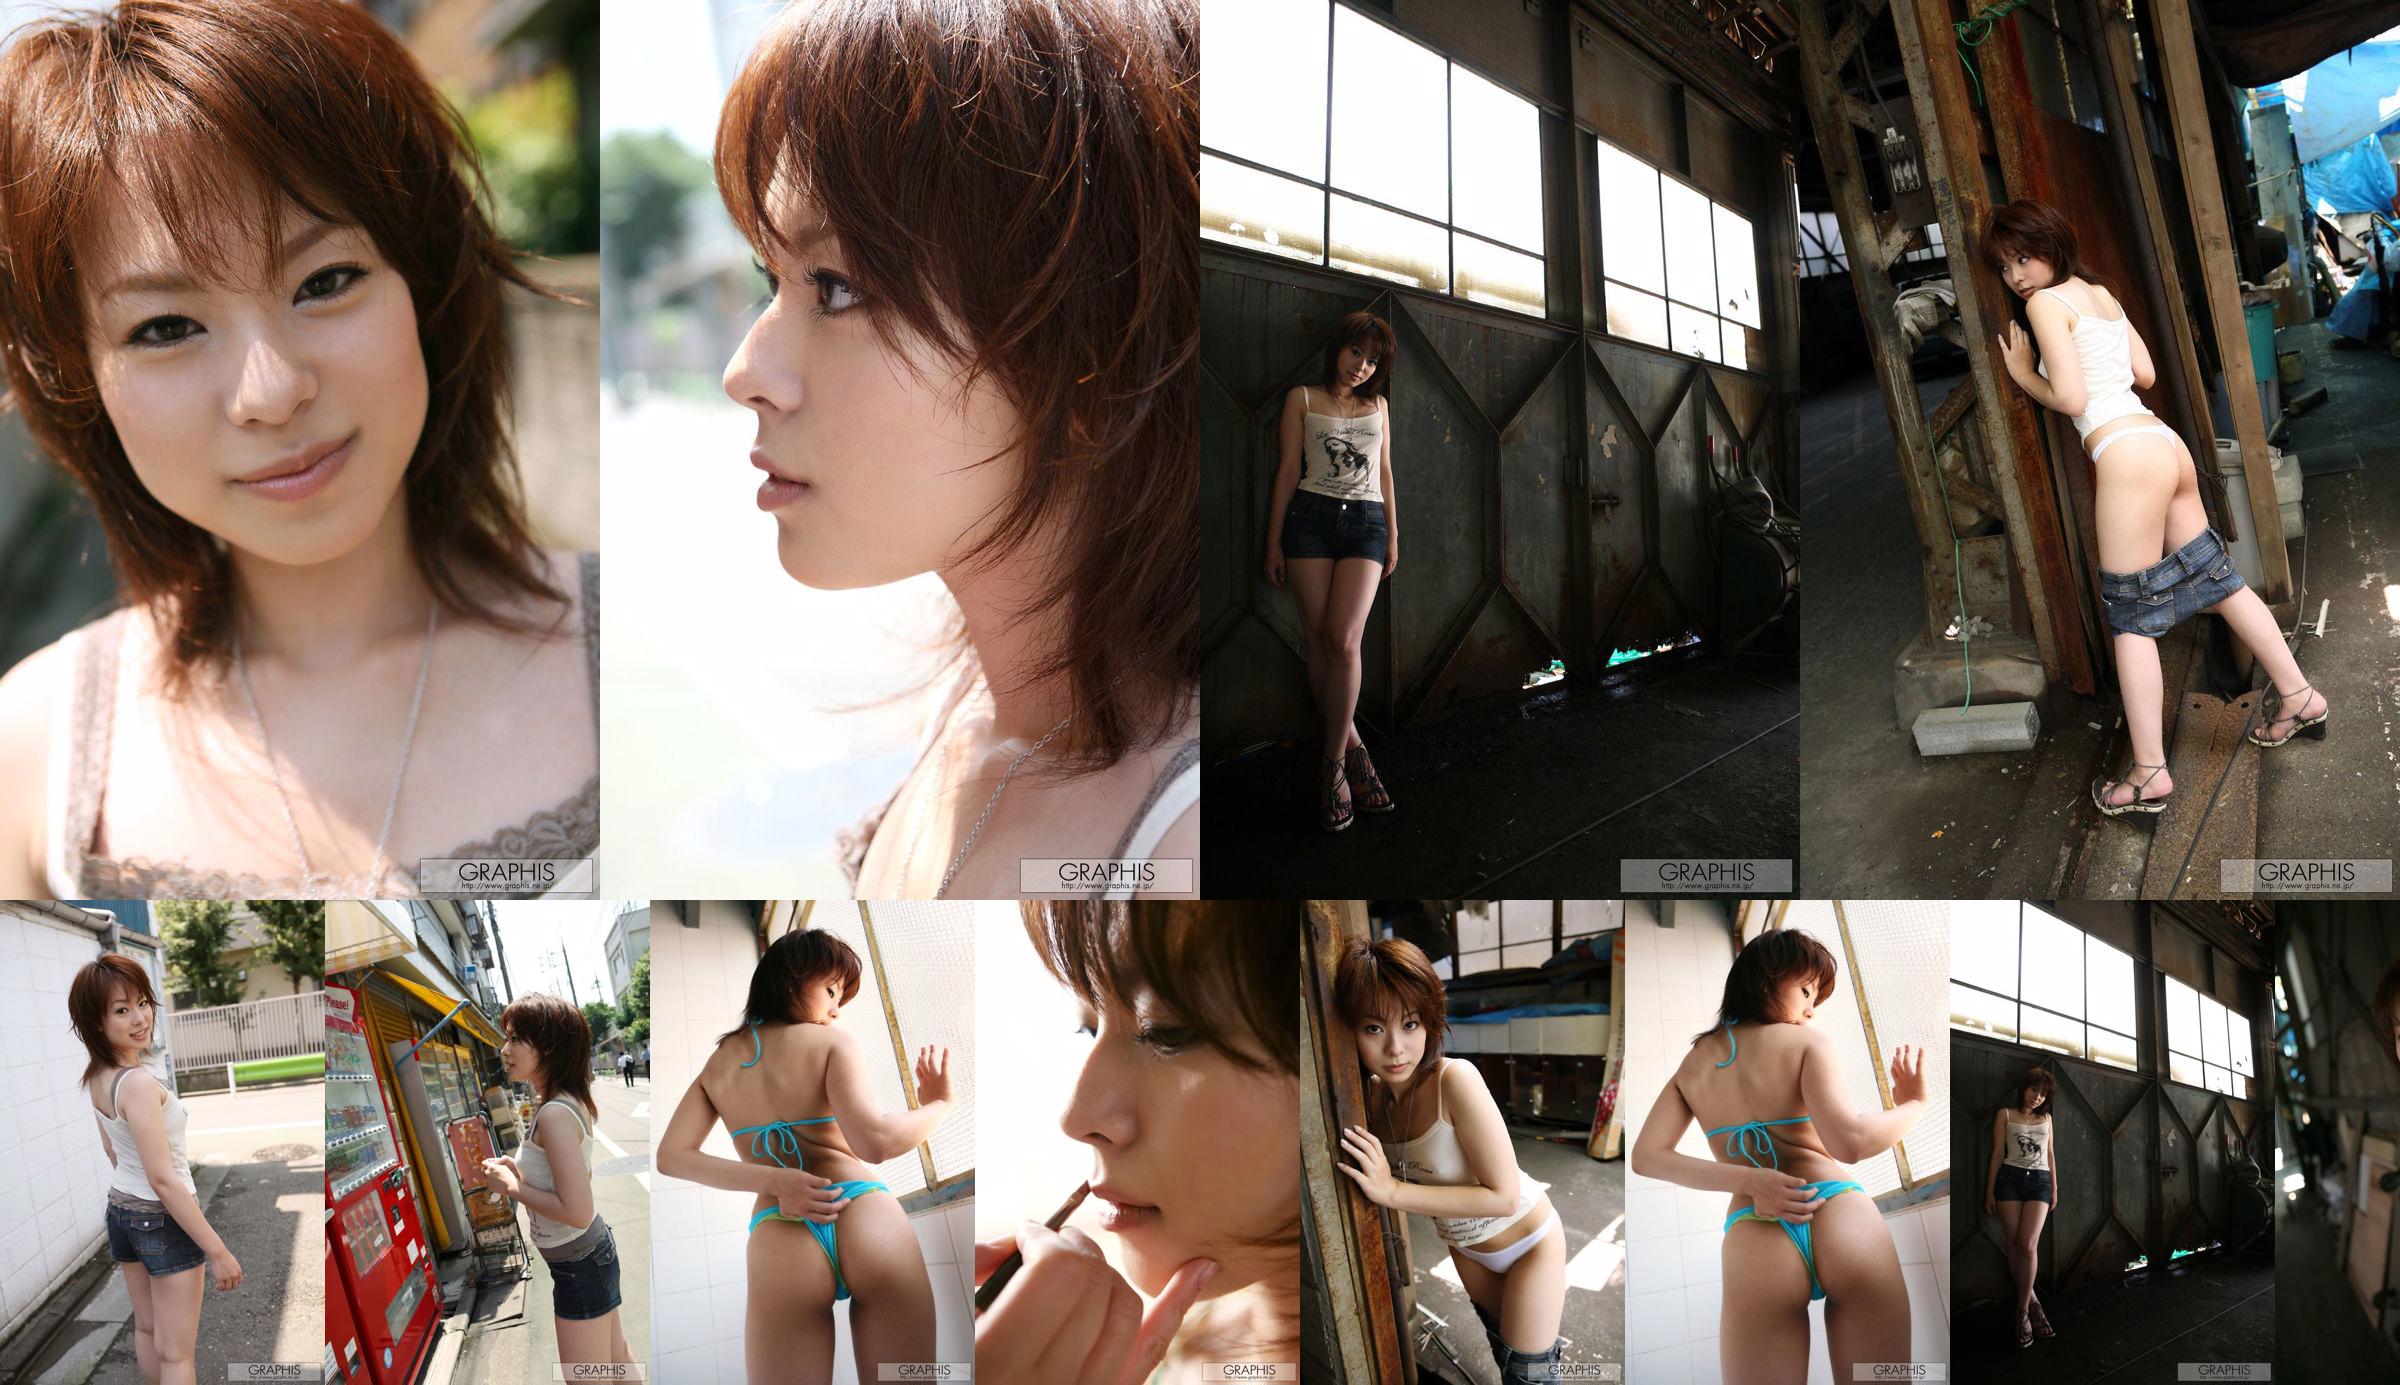 Mina Manabe 真锅美奈 [Graphis] First Gravure 初脱ぎ娘 No.6bf758 第2页